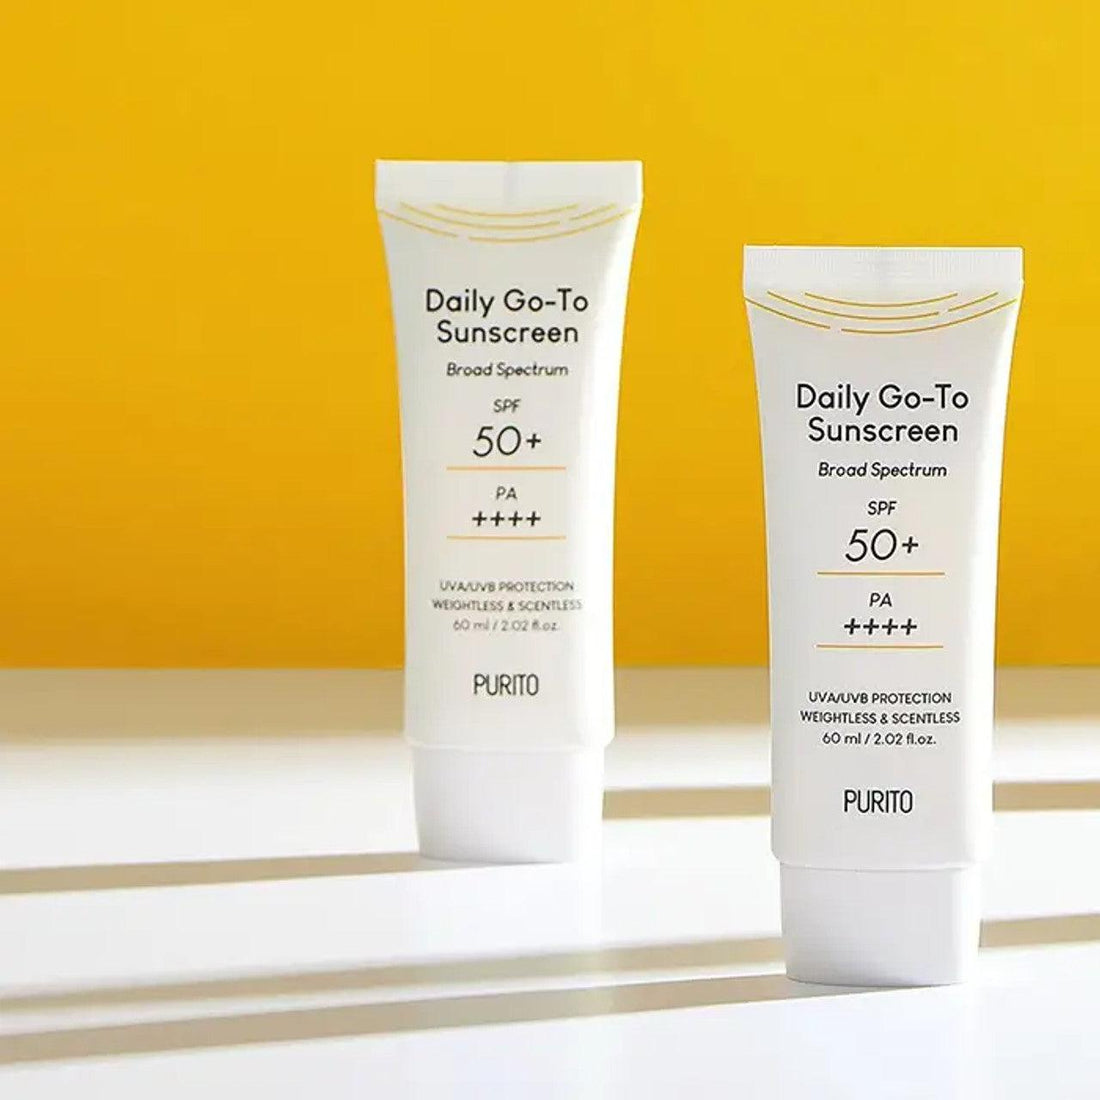 Purito Daily Go-To Sunscreen SPF50+ PA++++ 60ml: Broad Spectrum Sun Protection for Healthy Skin at Atelier de Glow